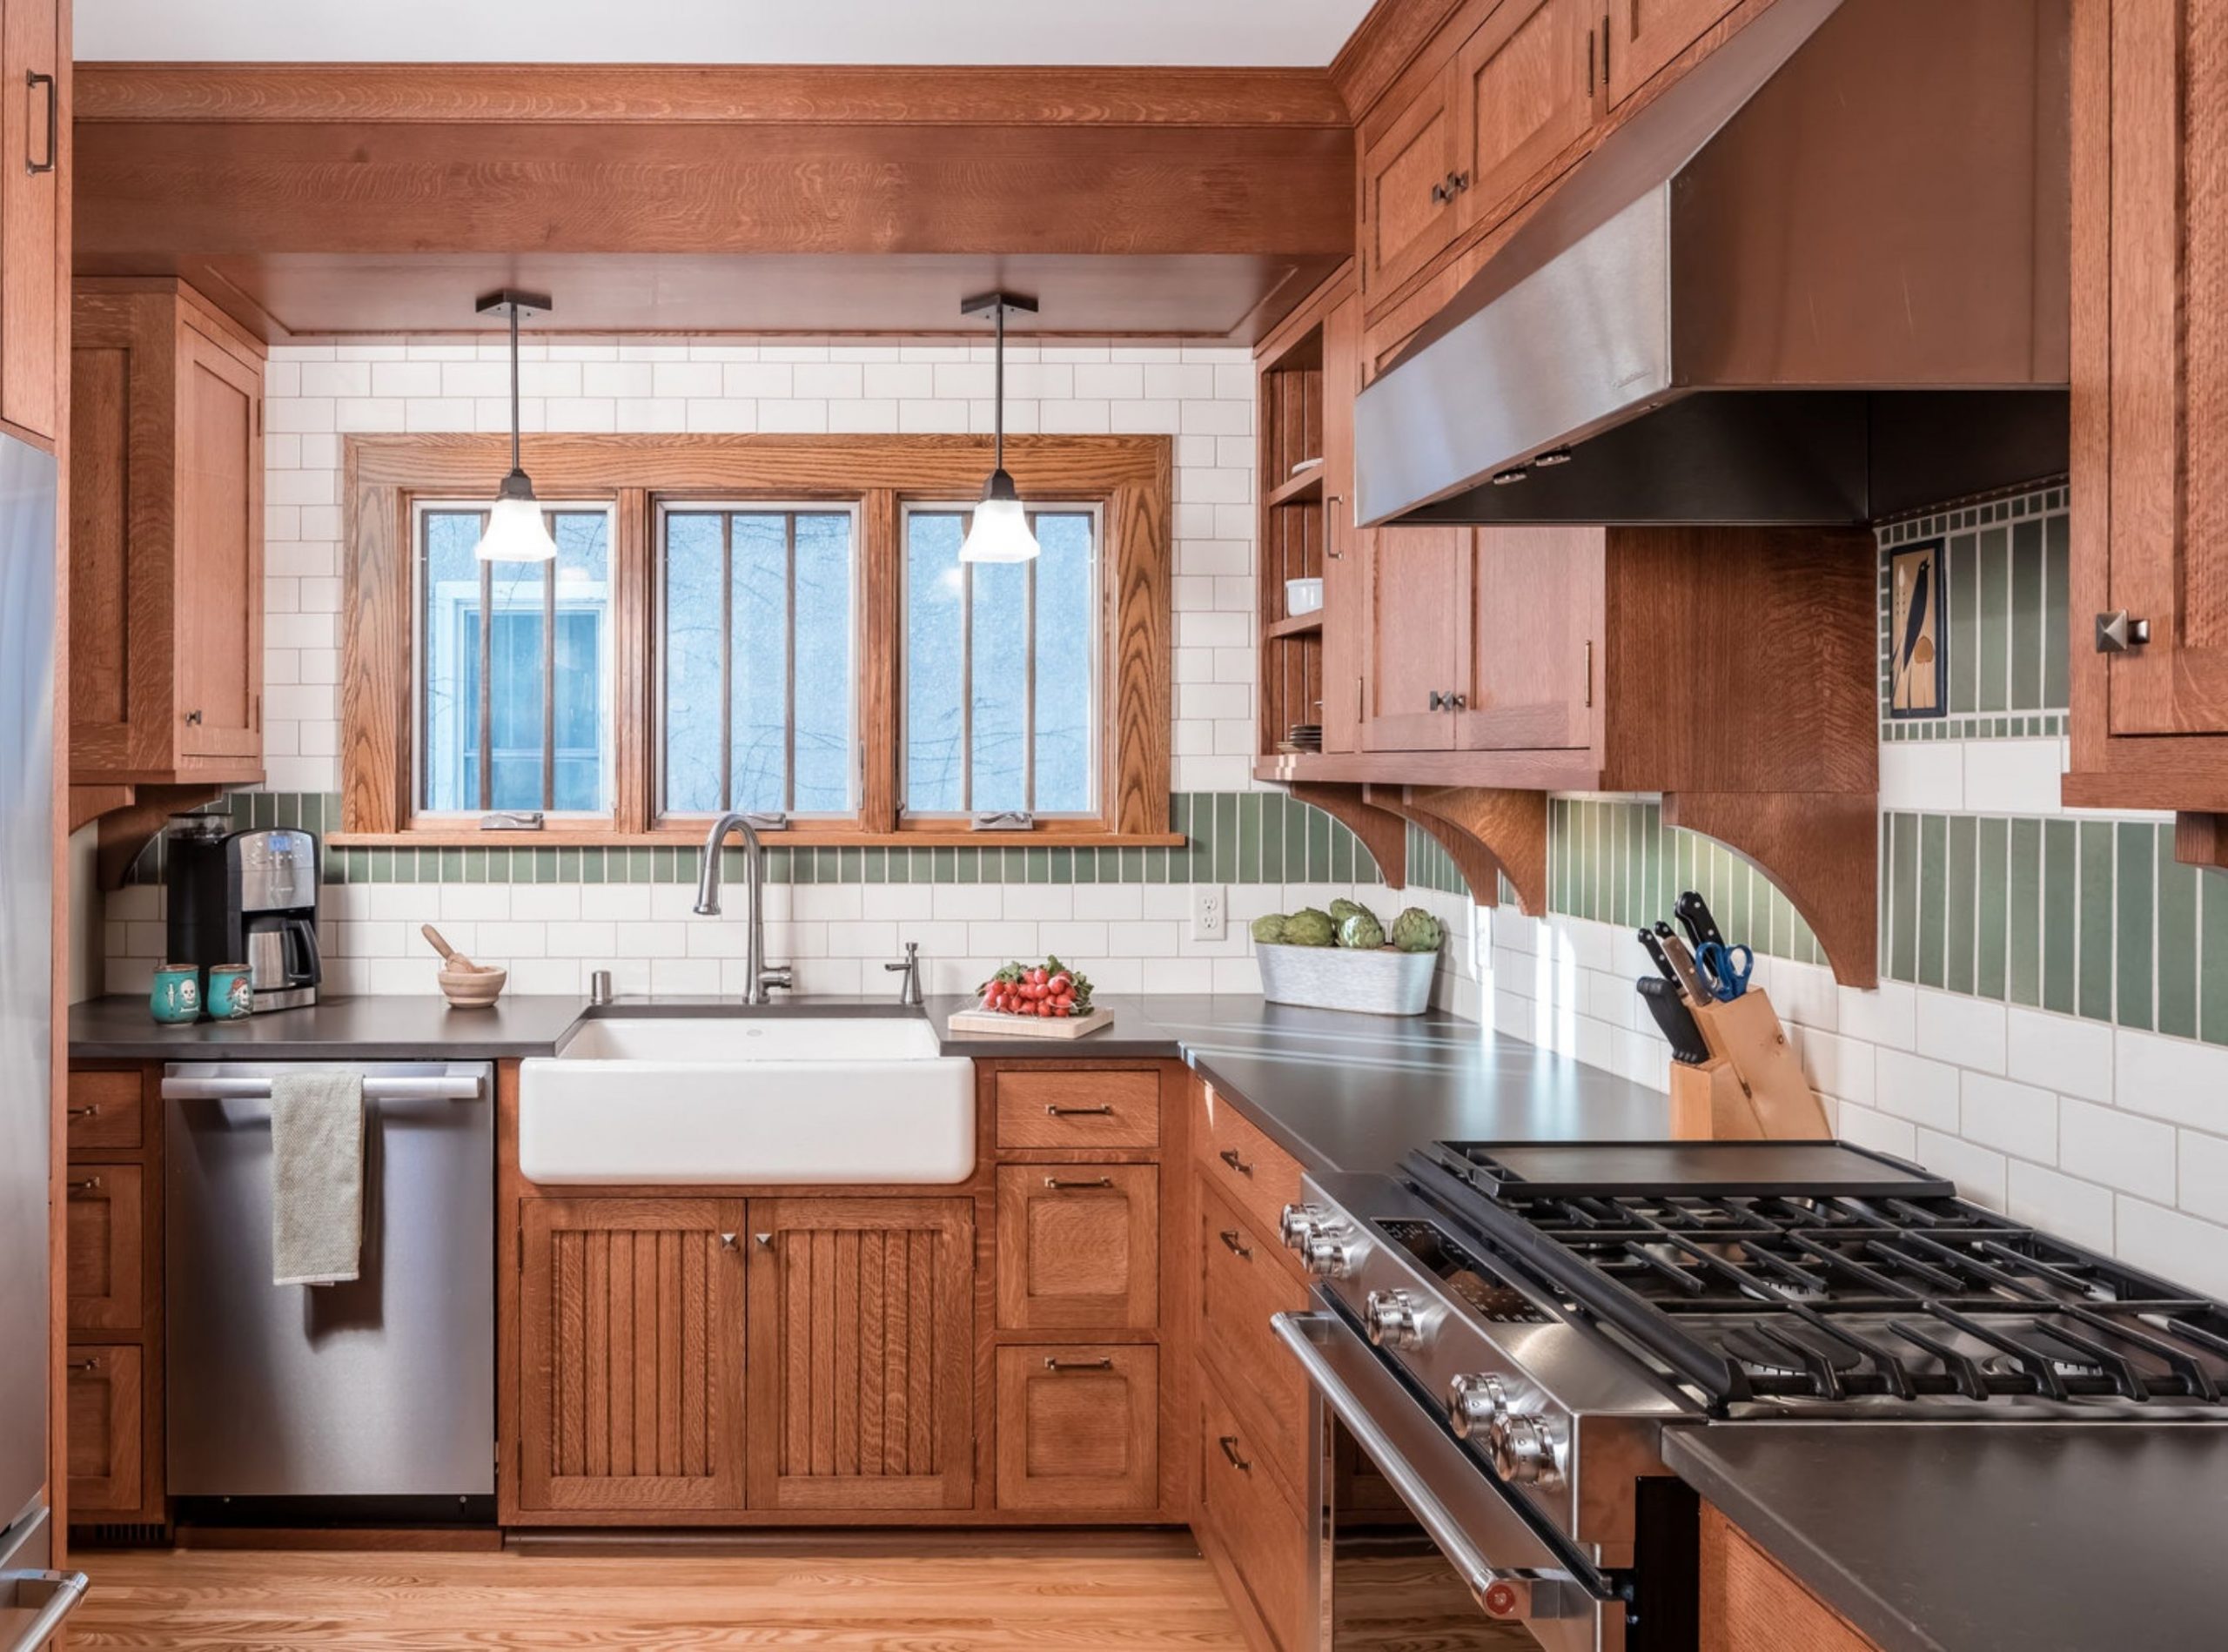 Timeless kitchen design with brown cabinets, stainless steel, and windows